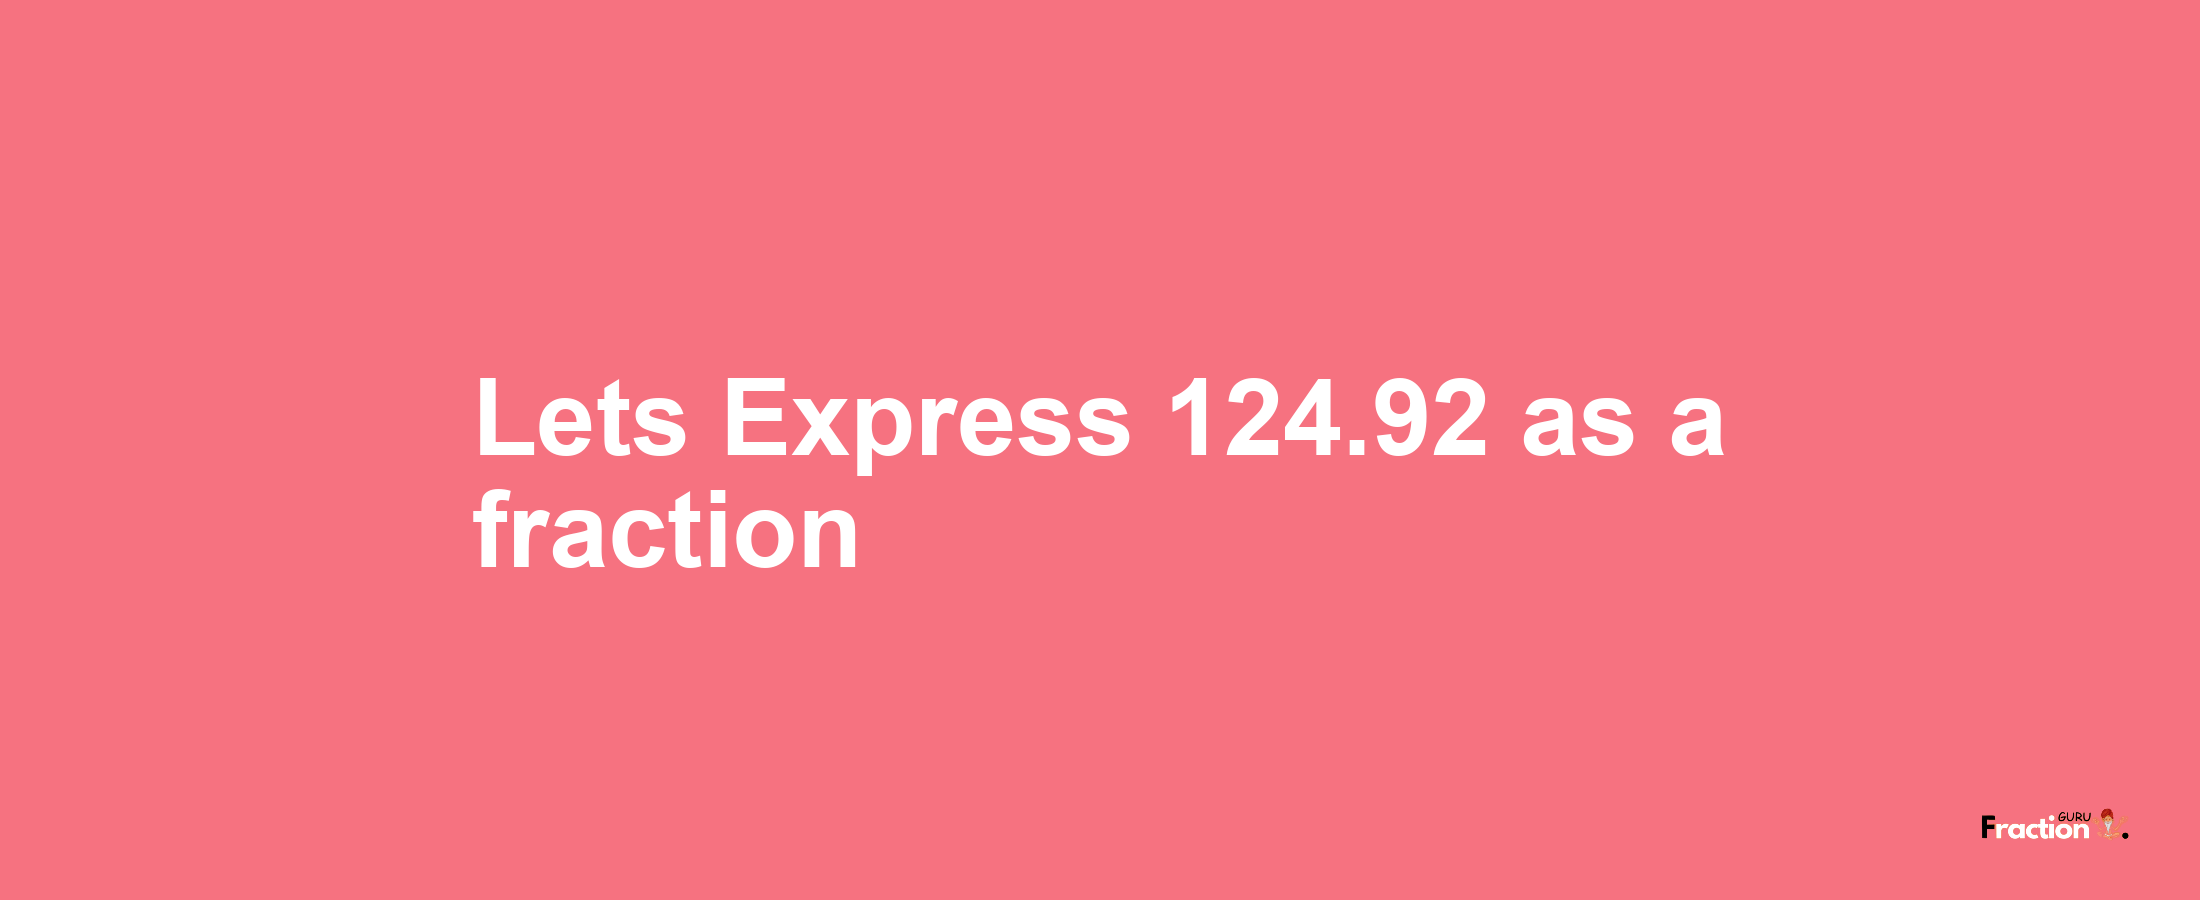 Lets Express 124.92 as afraction